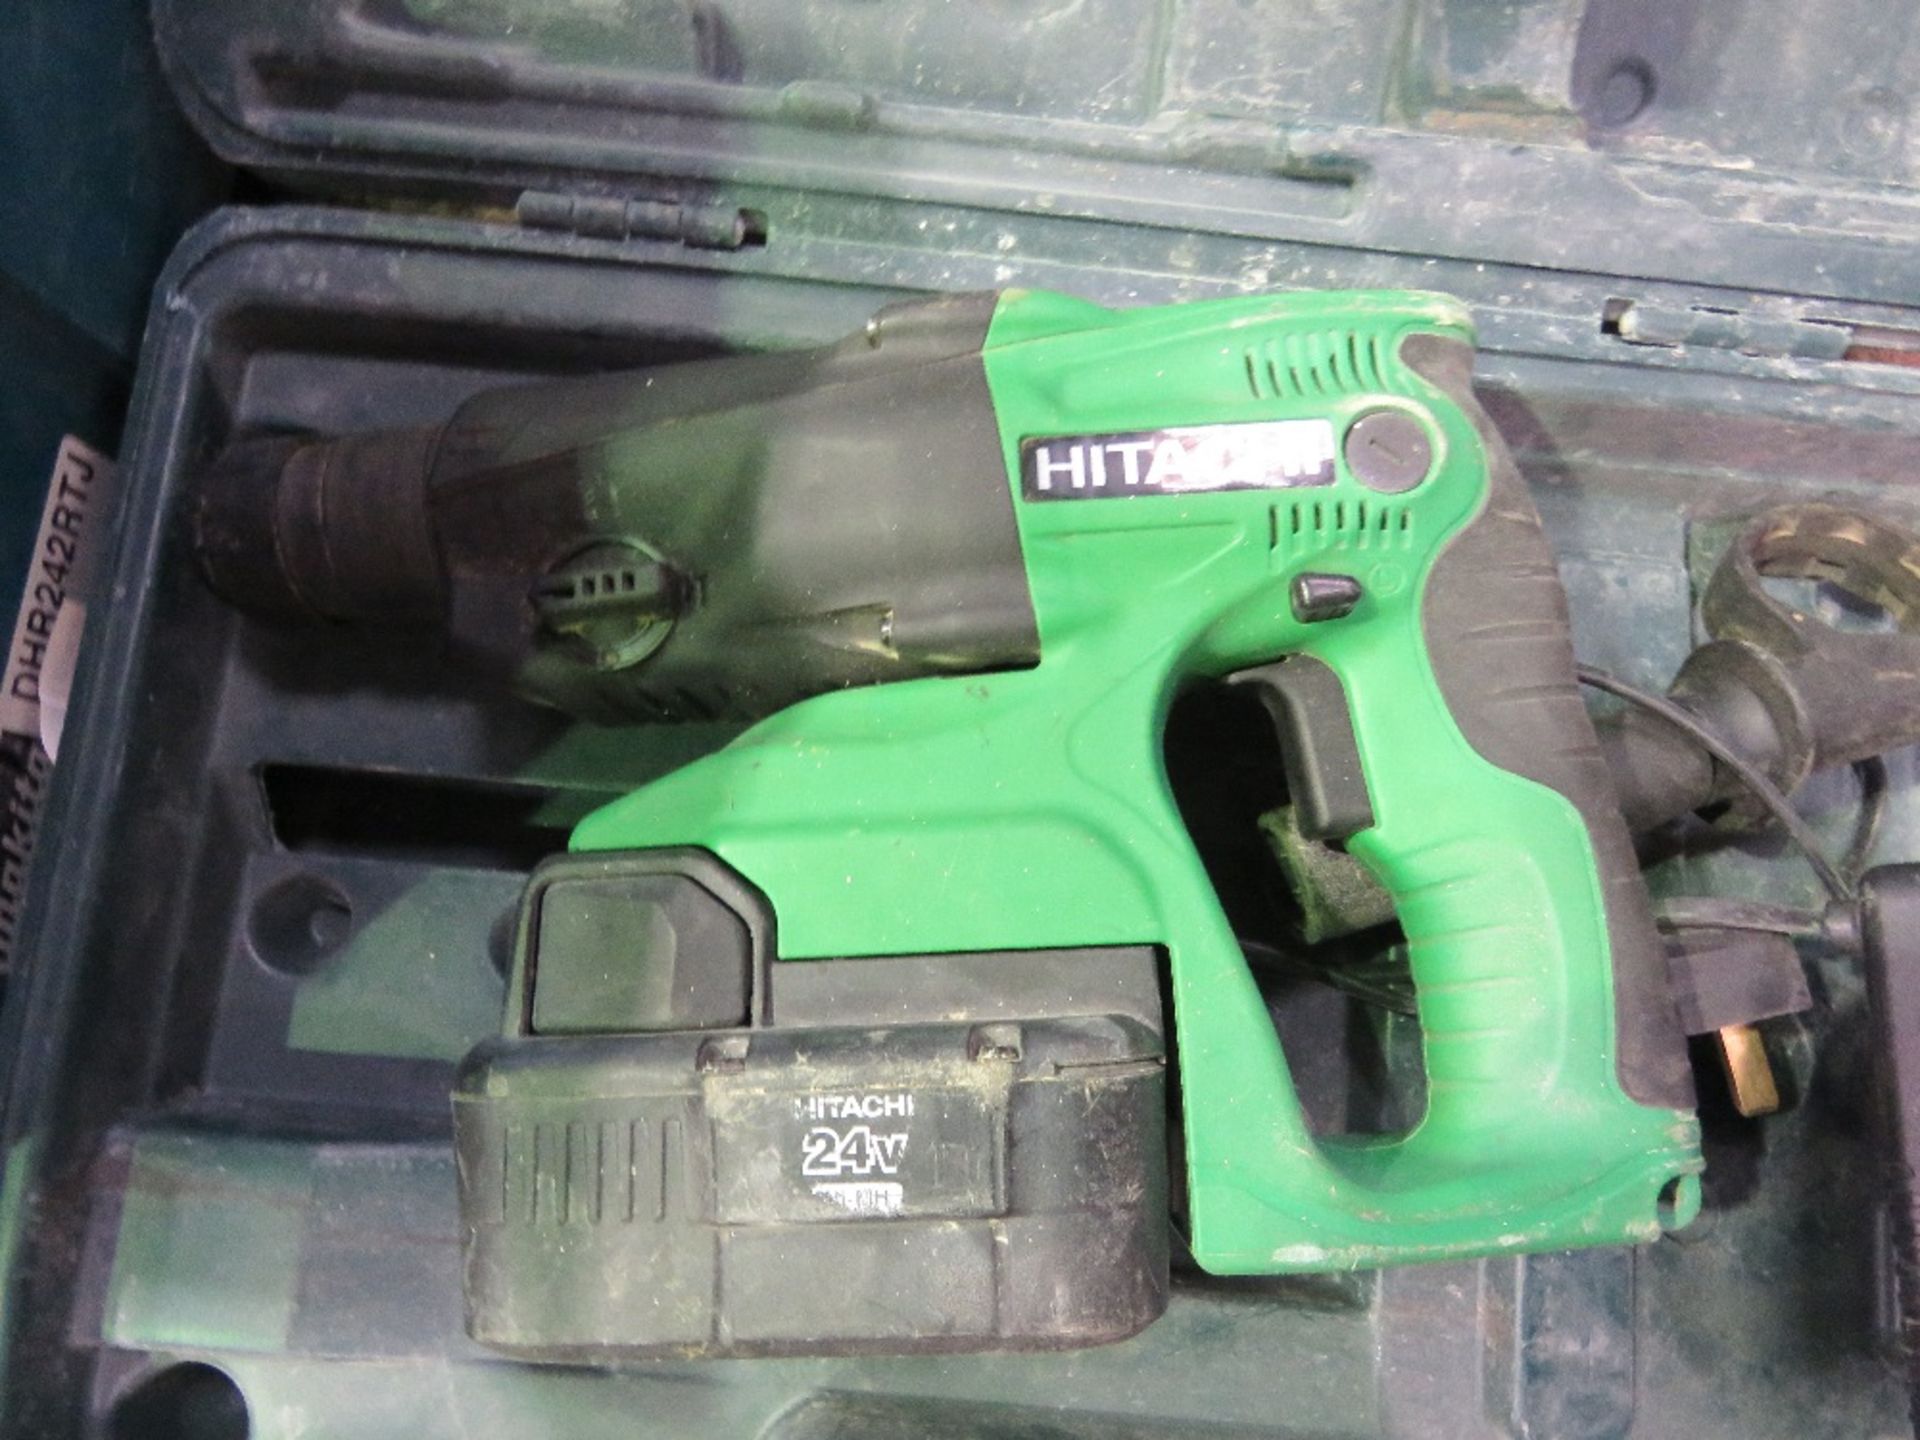 HITACHI 24V BATTERY DRILL SOURCED FROM LARGE CONSTRUCTION COMPANY LIQUIDATION. - Image 2 of 3